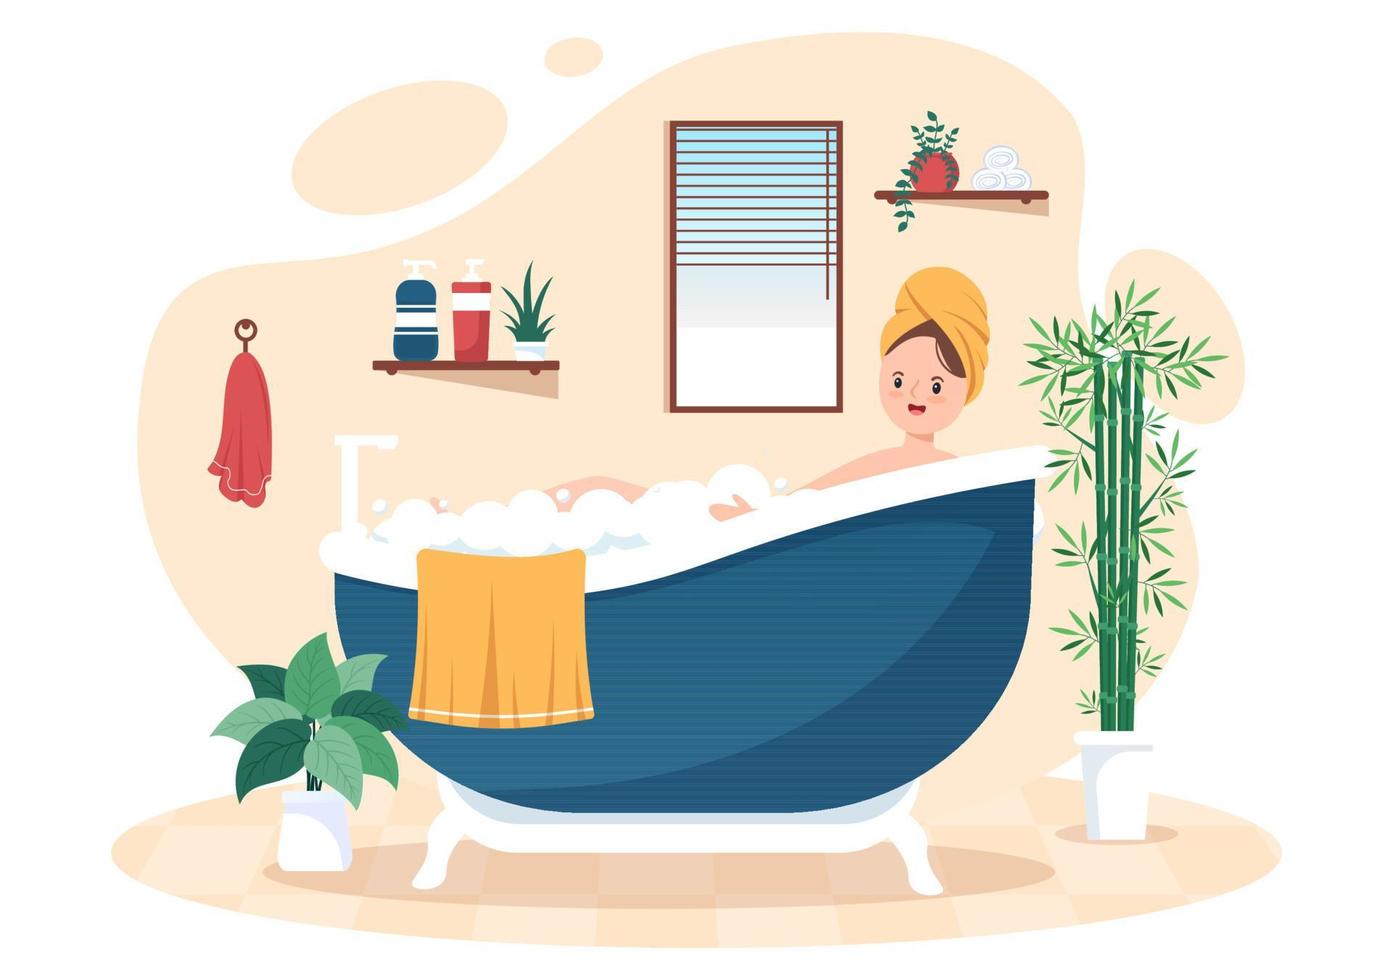 Modern Bathroom Furniture Interior Background Illustration with girl taking a bath in the bathtub in Flat Color Style vector